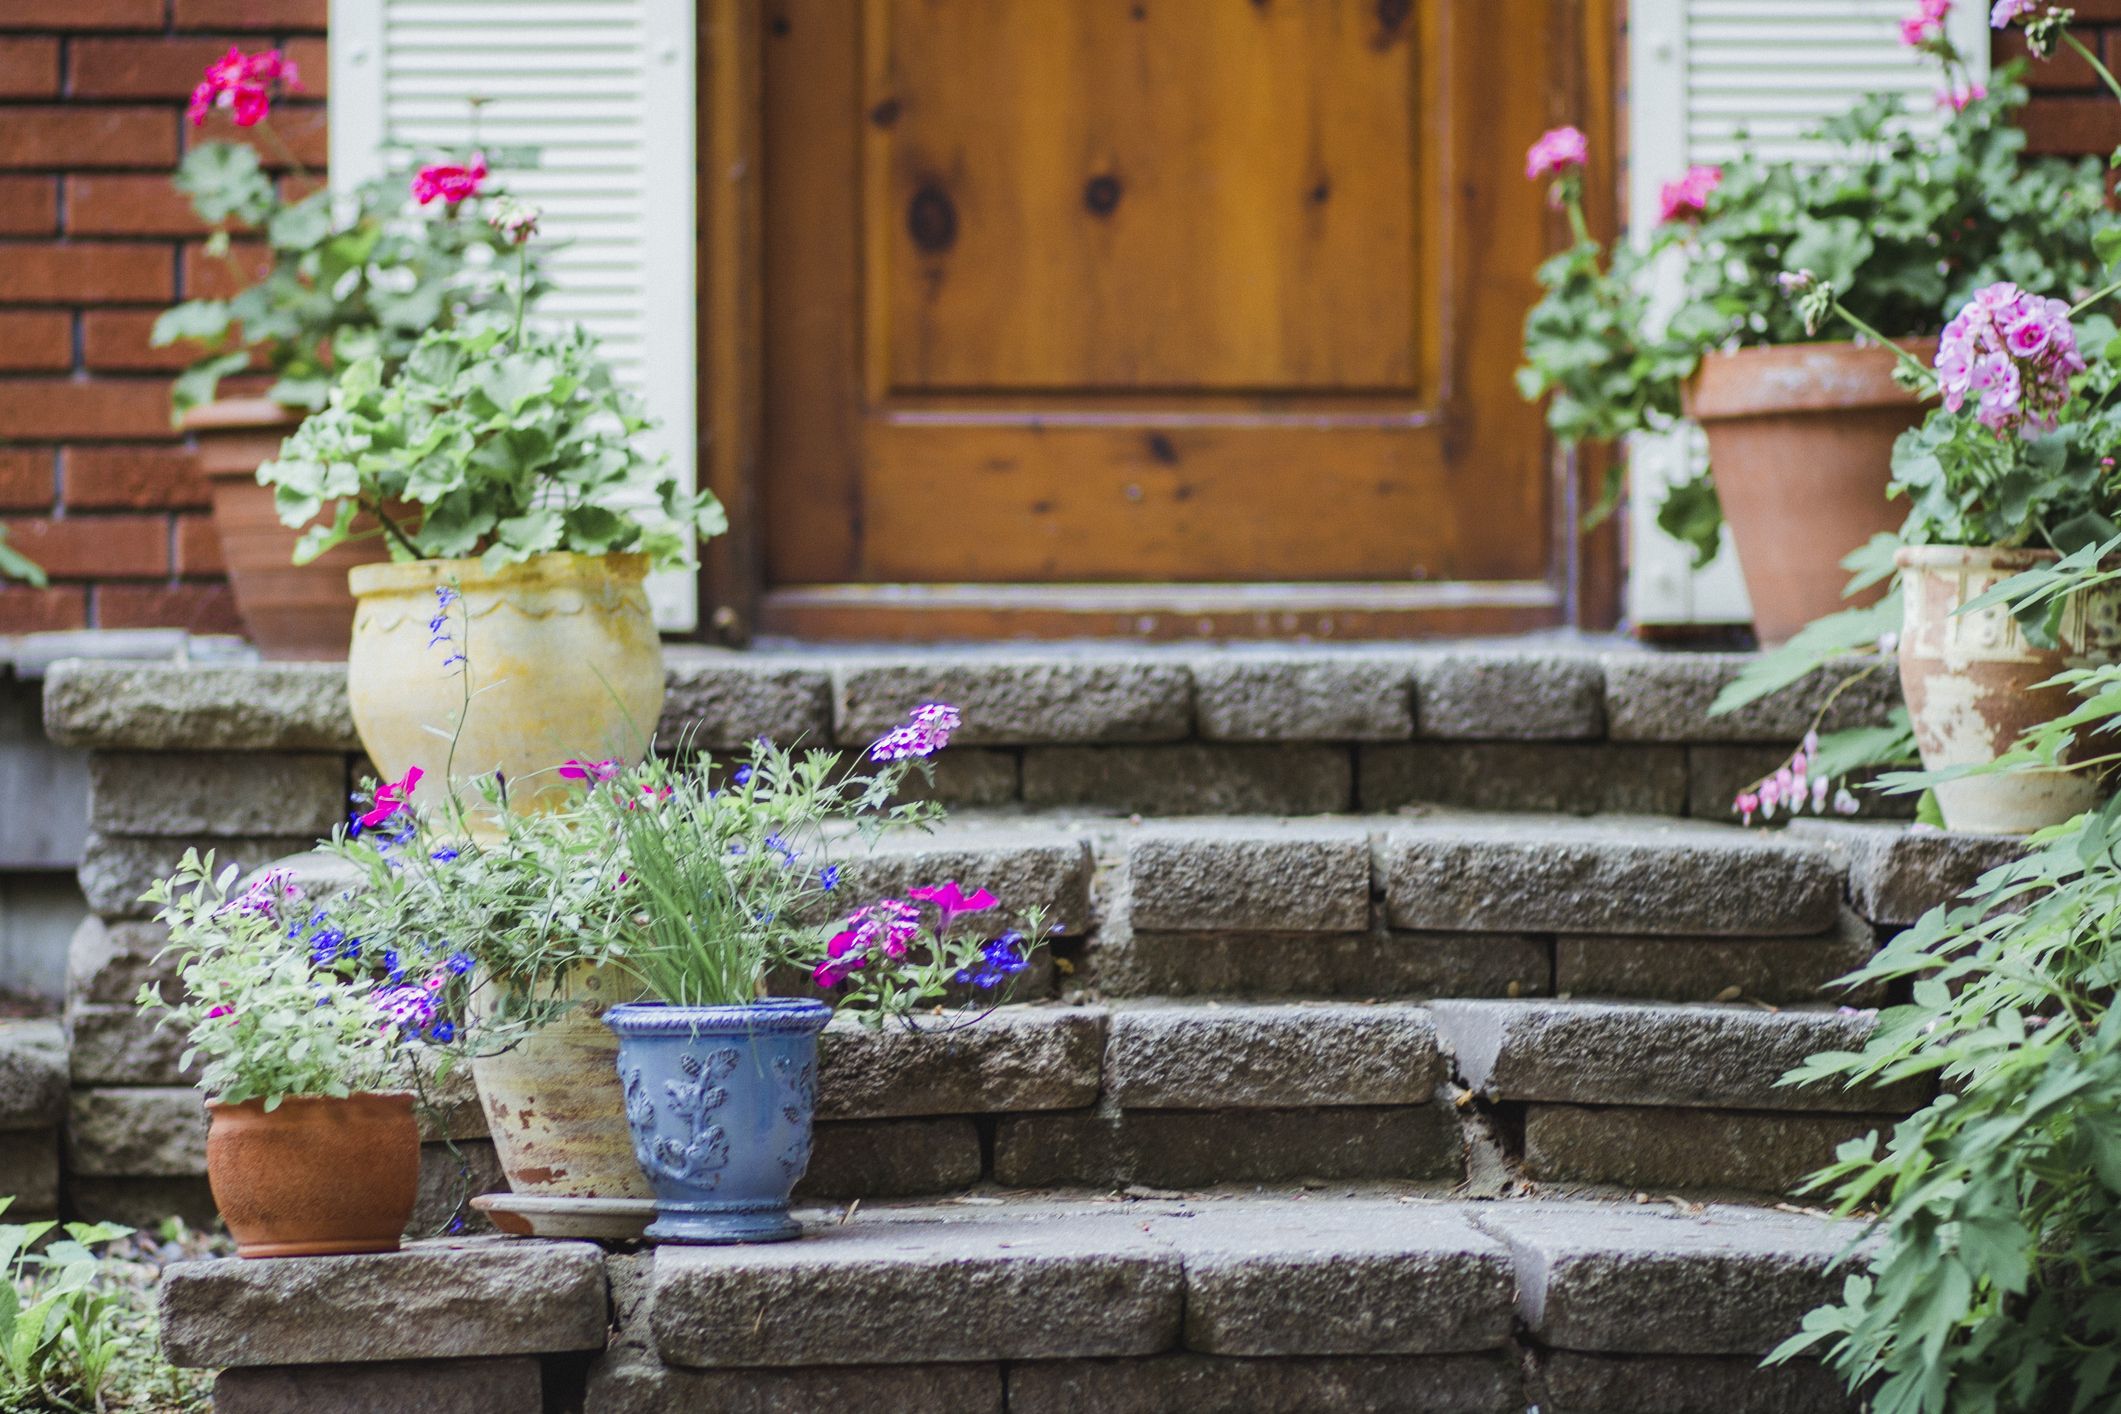  Best Front Door Plants Plants For Your Front Door - How To Decorate Front Porch With Potted Plants